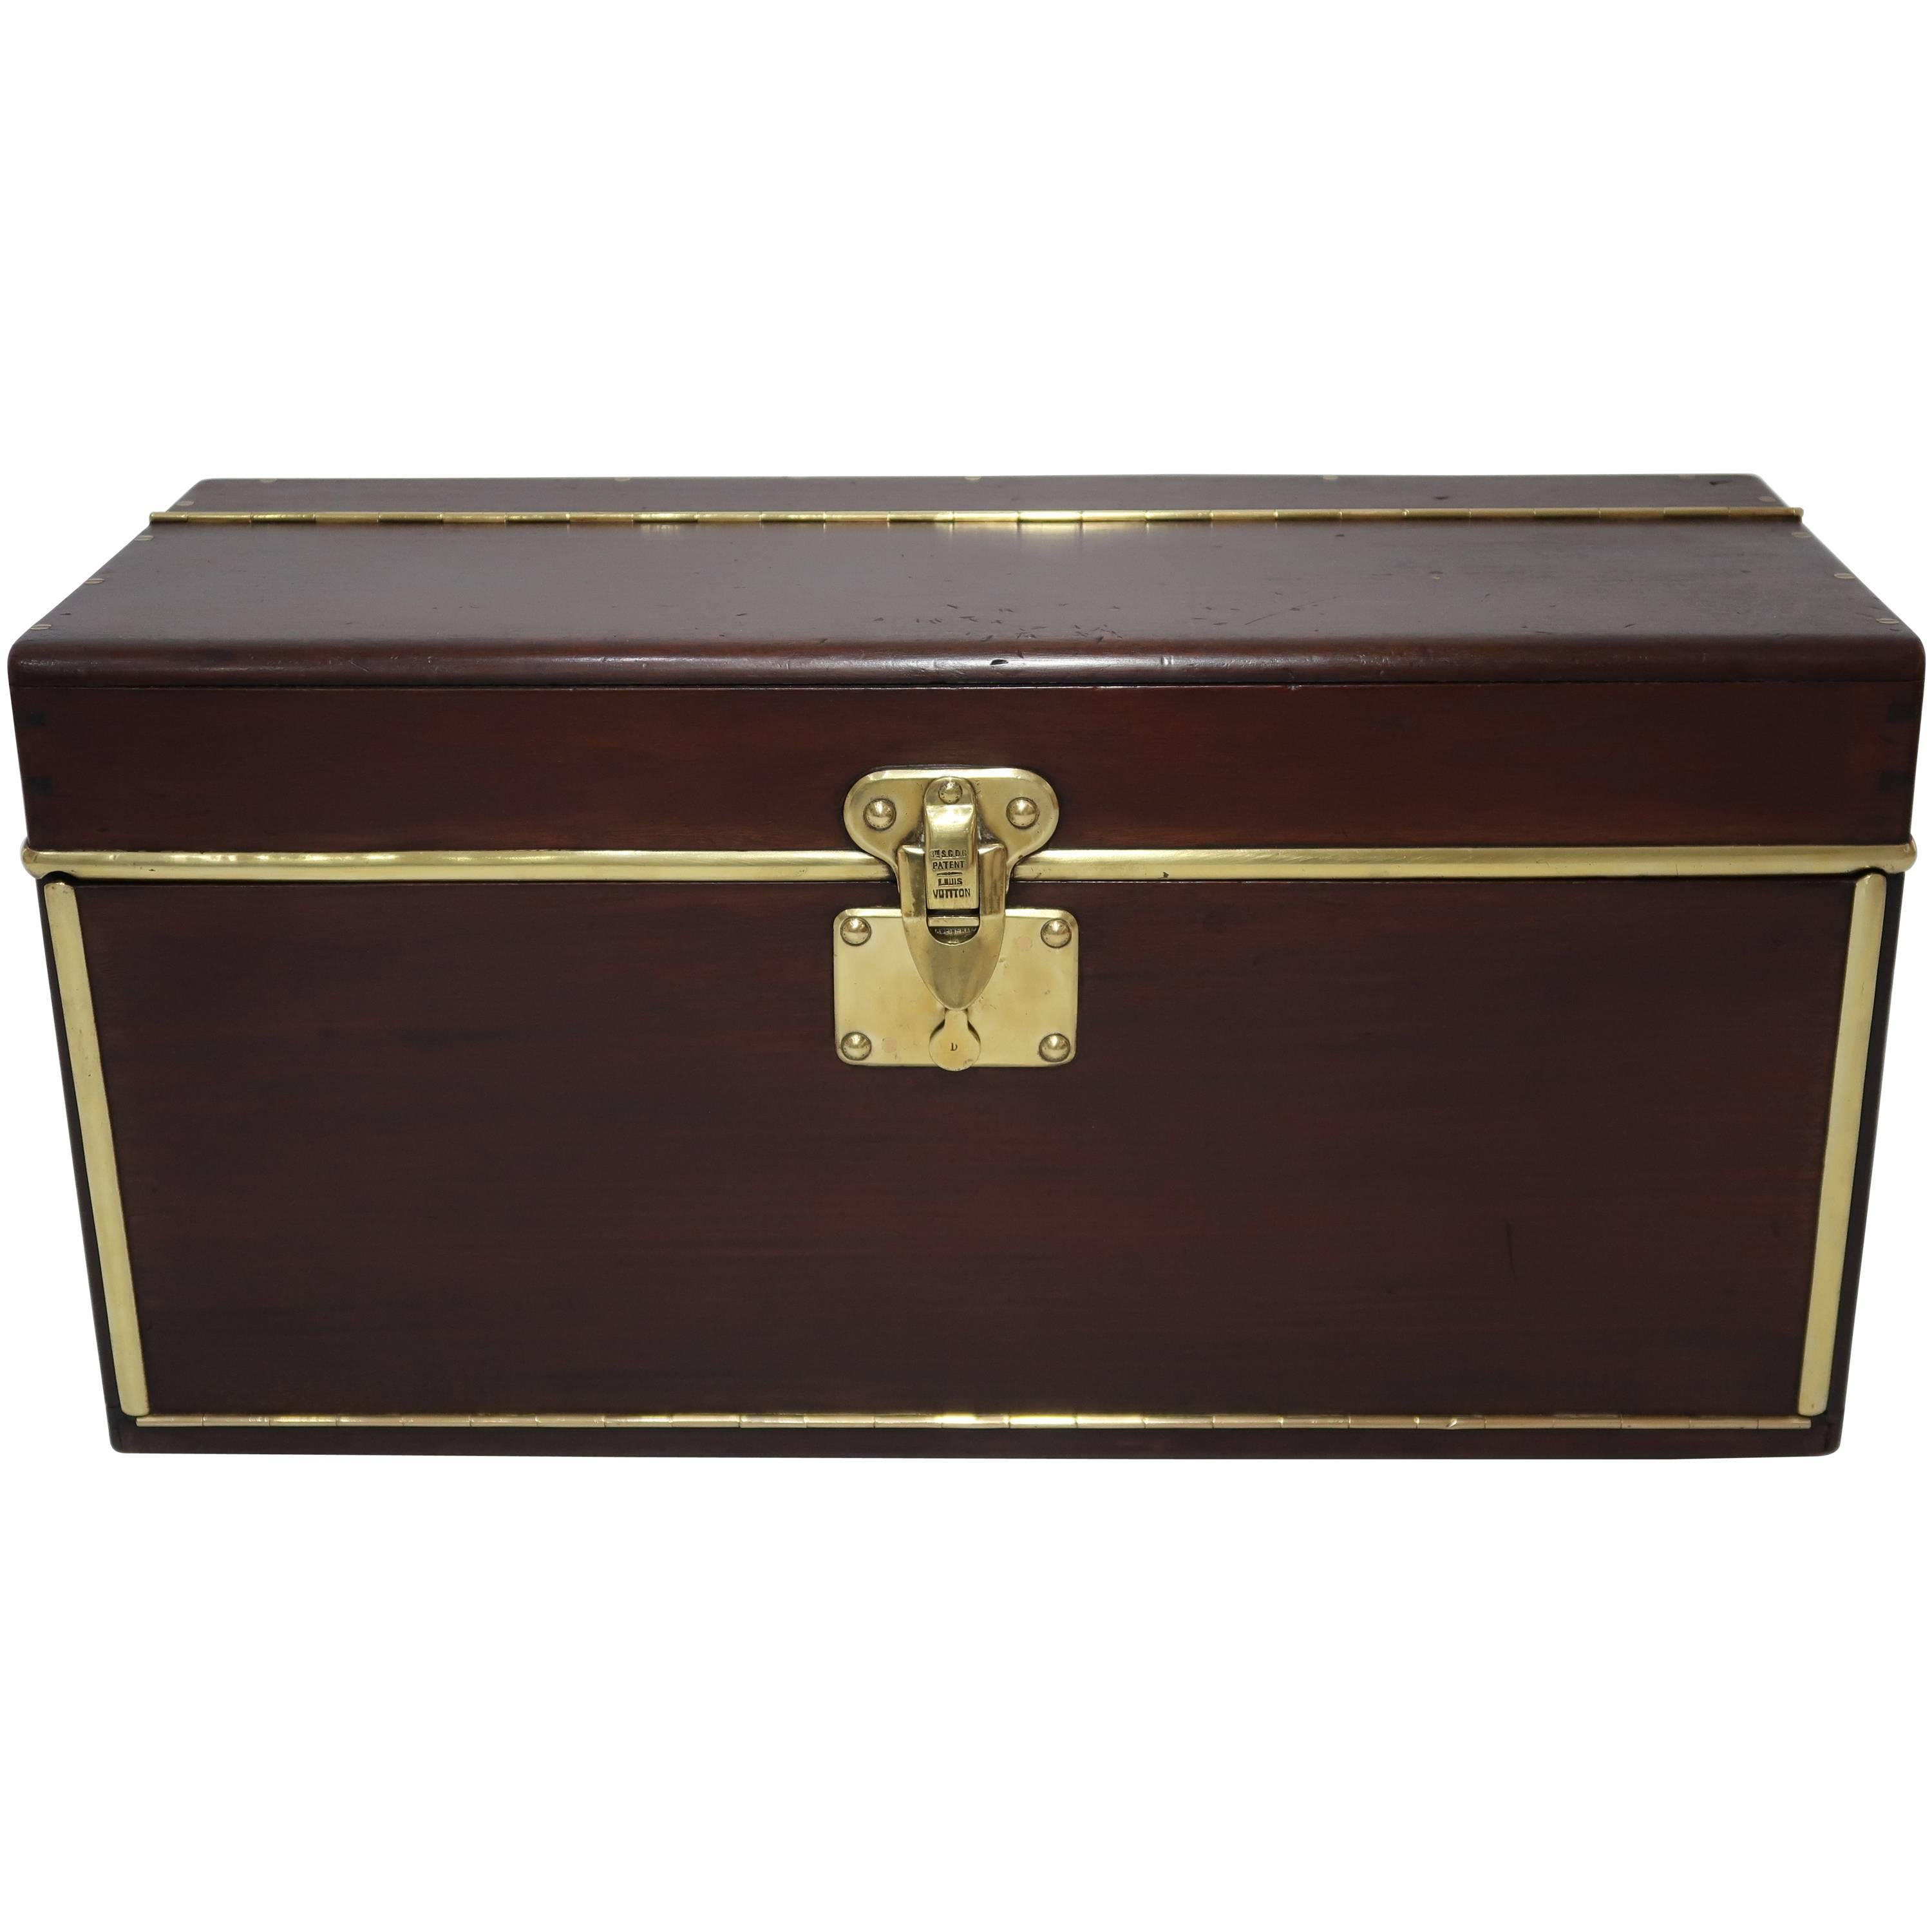 1890s Louis Vuitton Wooden Tool Box Trunk, 1 of the 100 Legendary Trunks  For Sale at 1stDibs